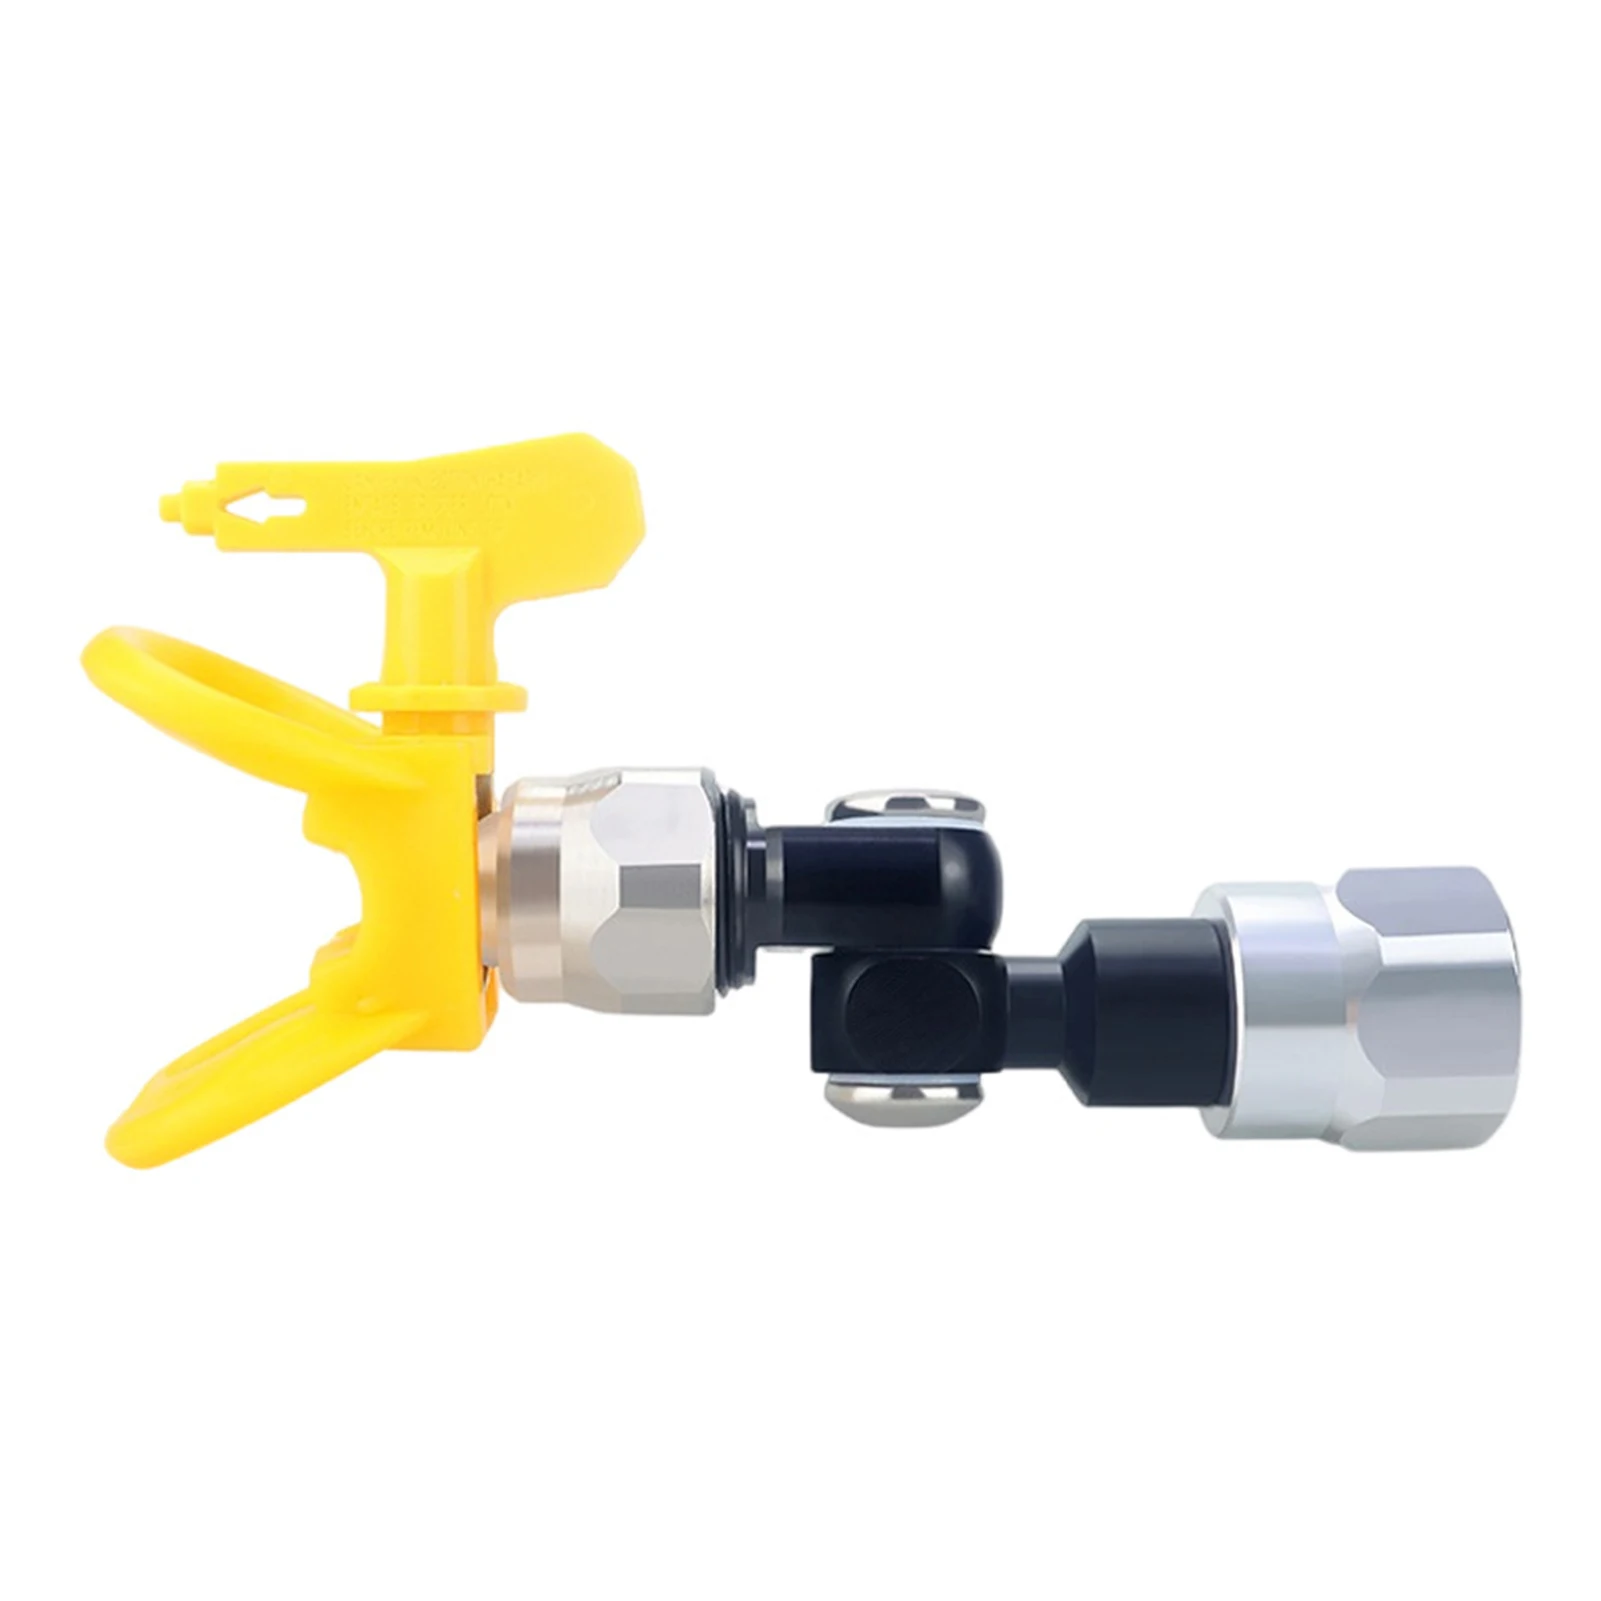 

Multifunctional Universal Joint With Sealing Gasket Flexible Easy To Install Connector Airless Sprayer Alloy Tight Thread Rotary